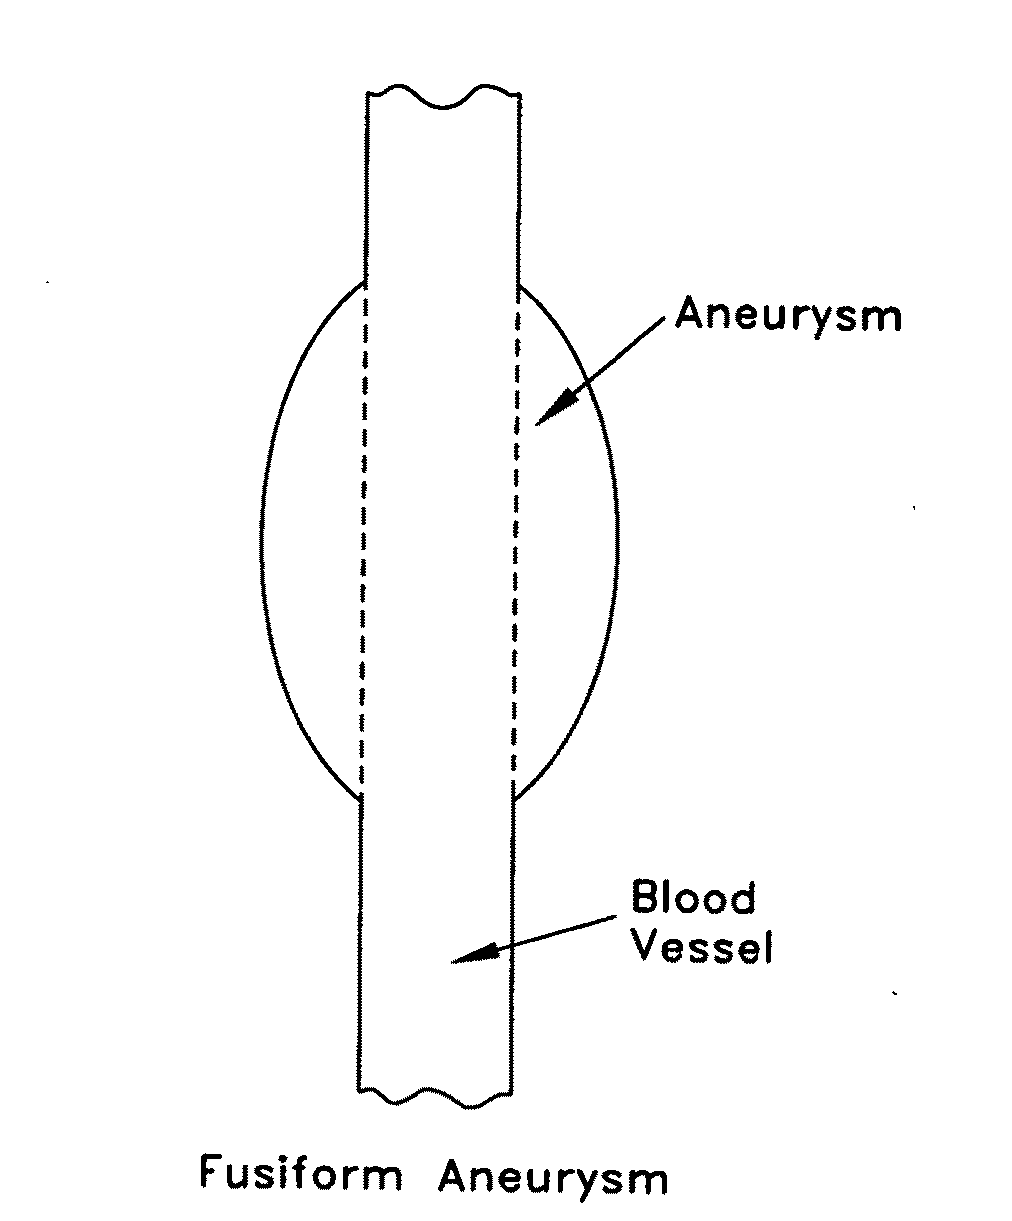 Method and apparatus for sealing an opening in the side wall of a body lumen, and/or for reinforcing a weakness in the side wall of a body lumen, while maintaining substantially normal flow through the body lumen